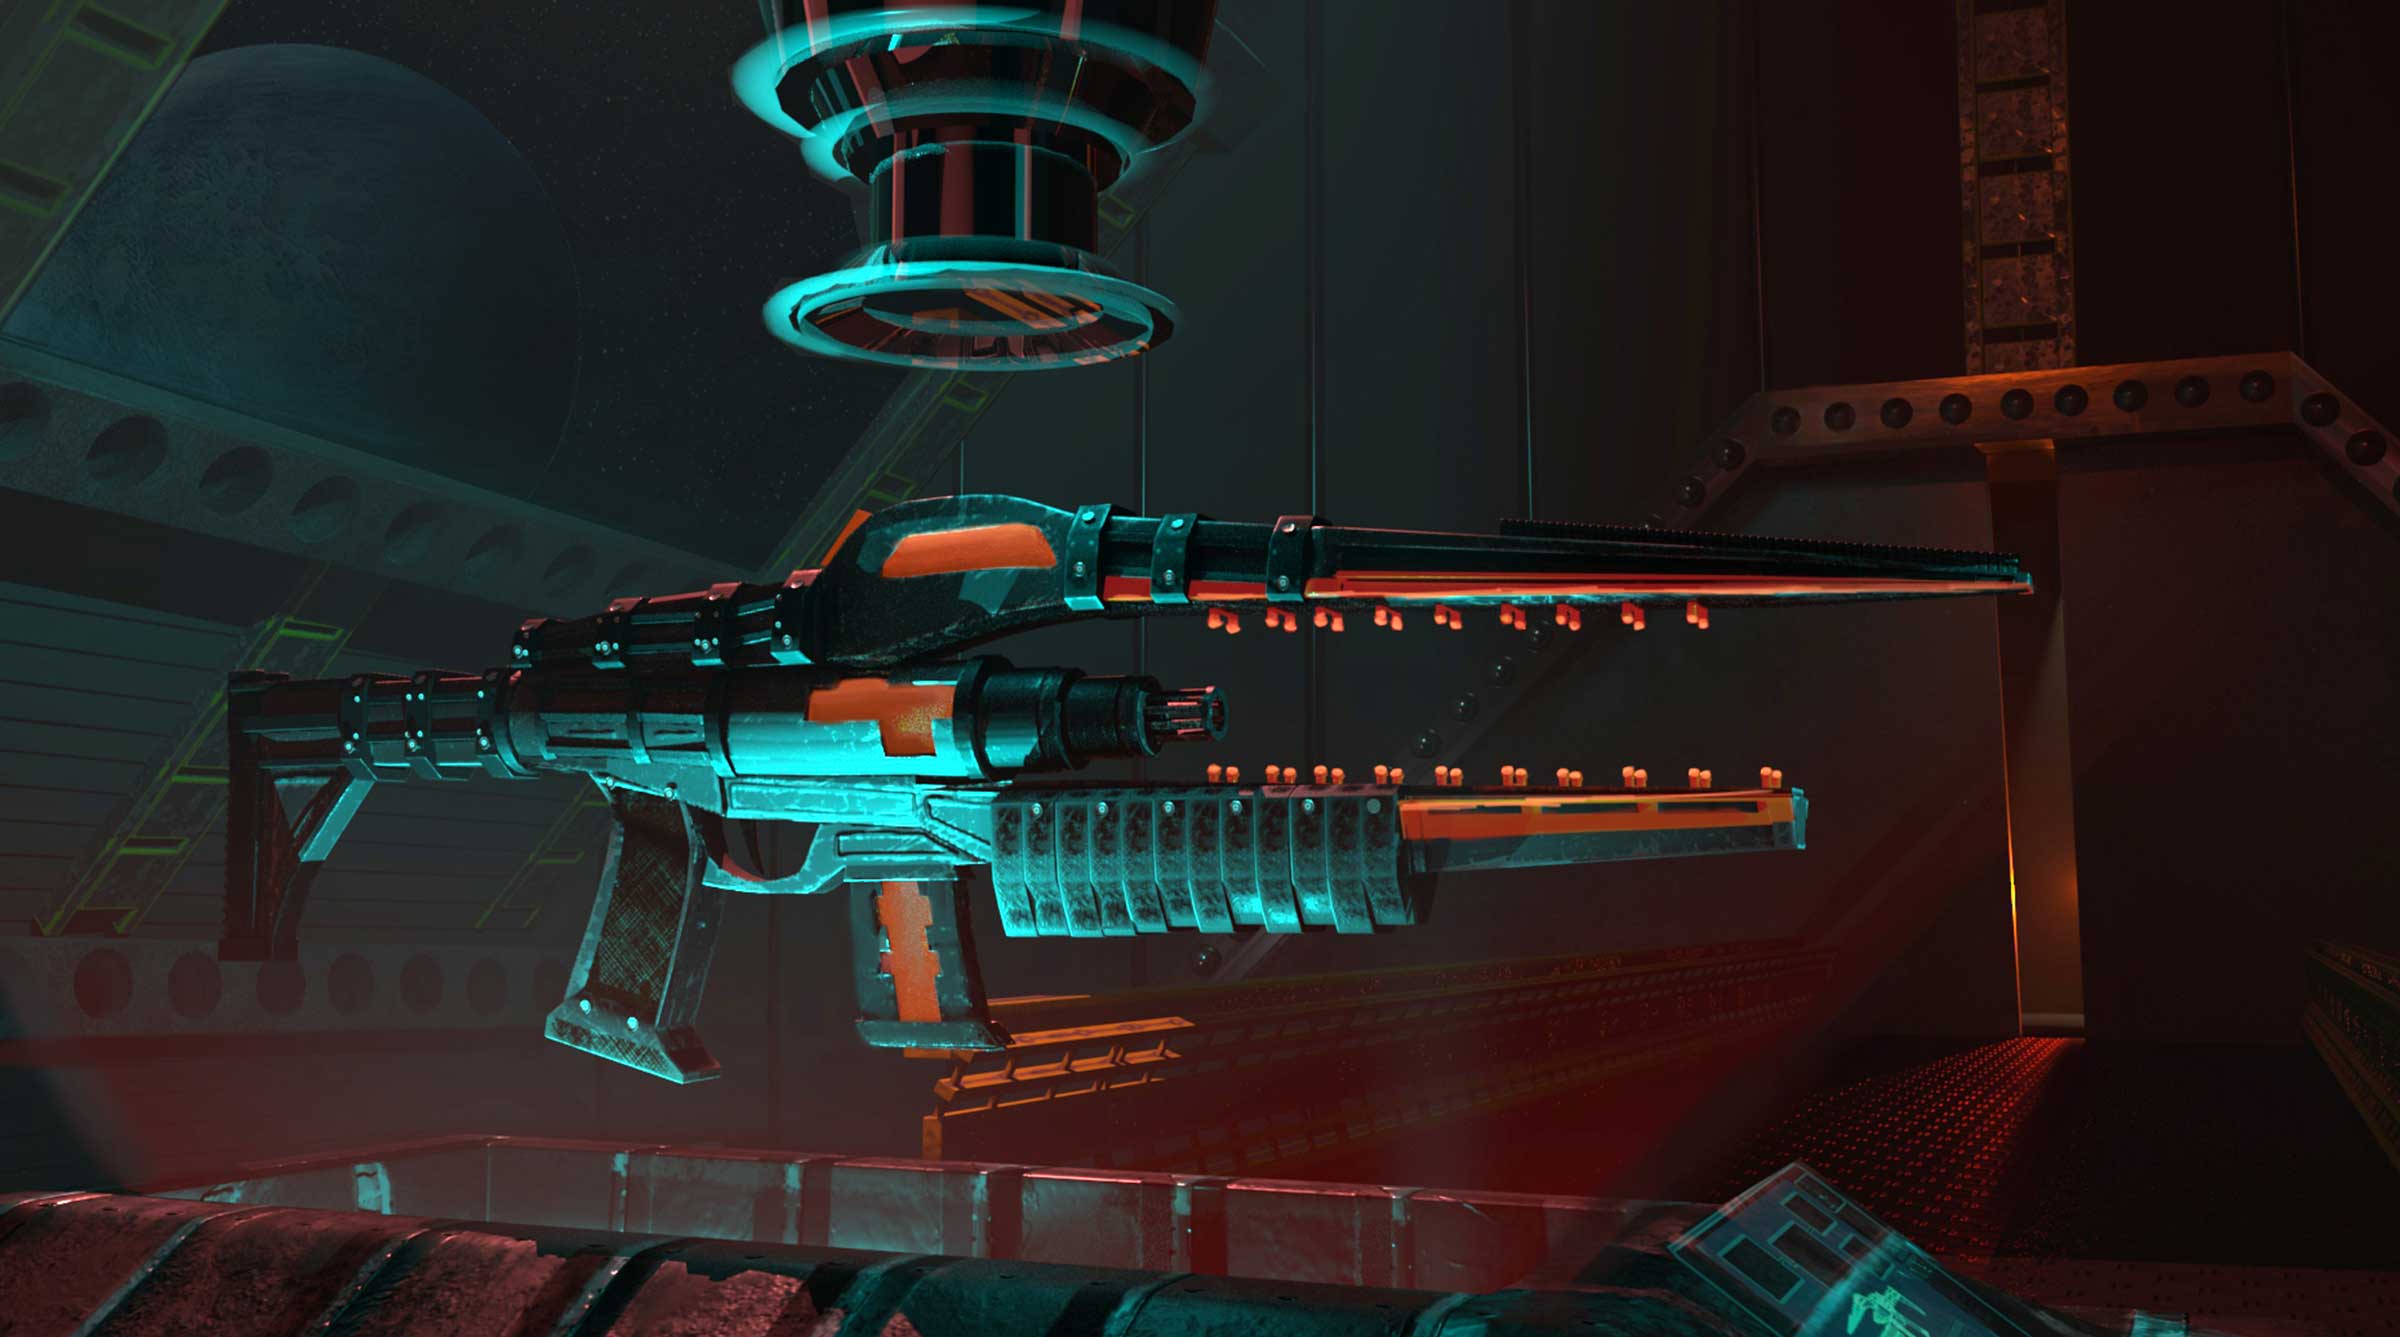 A futuristic weapon showcased within a factory.